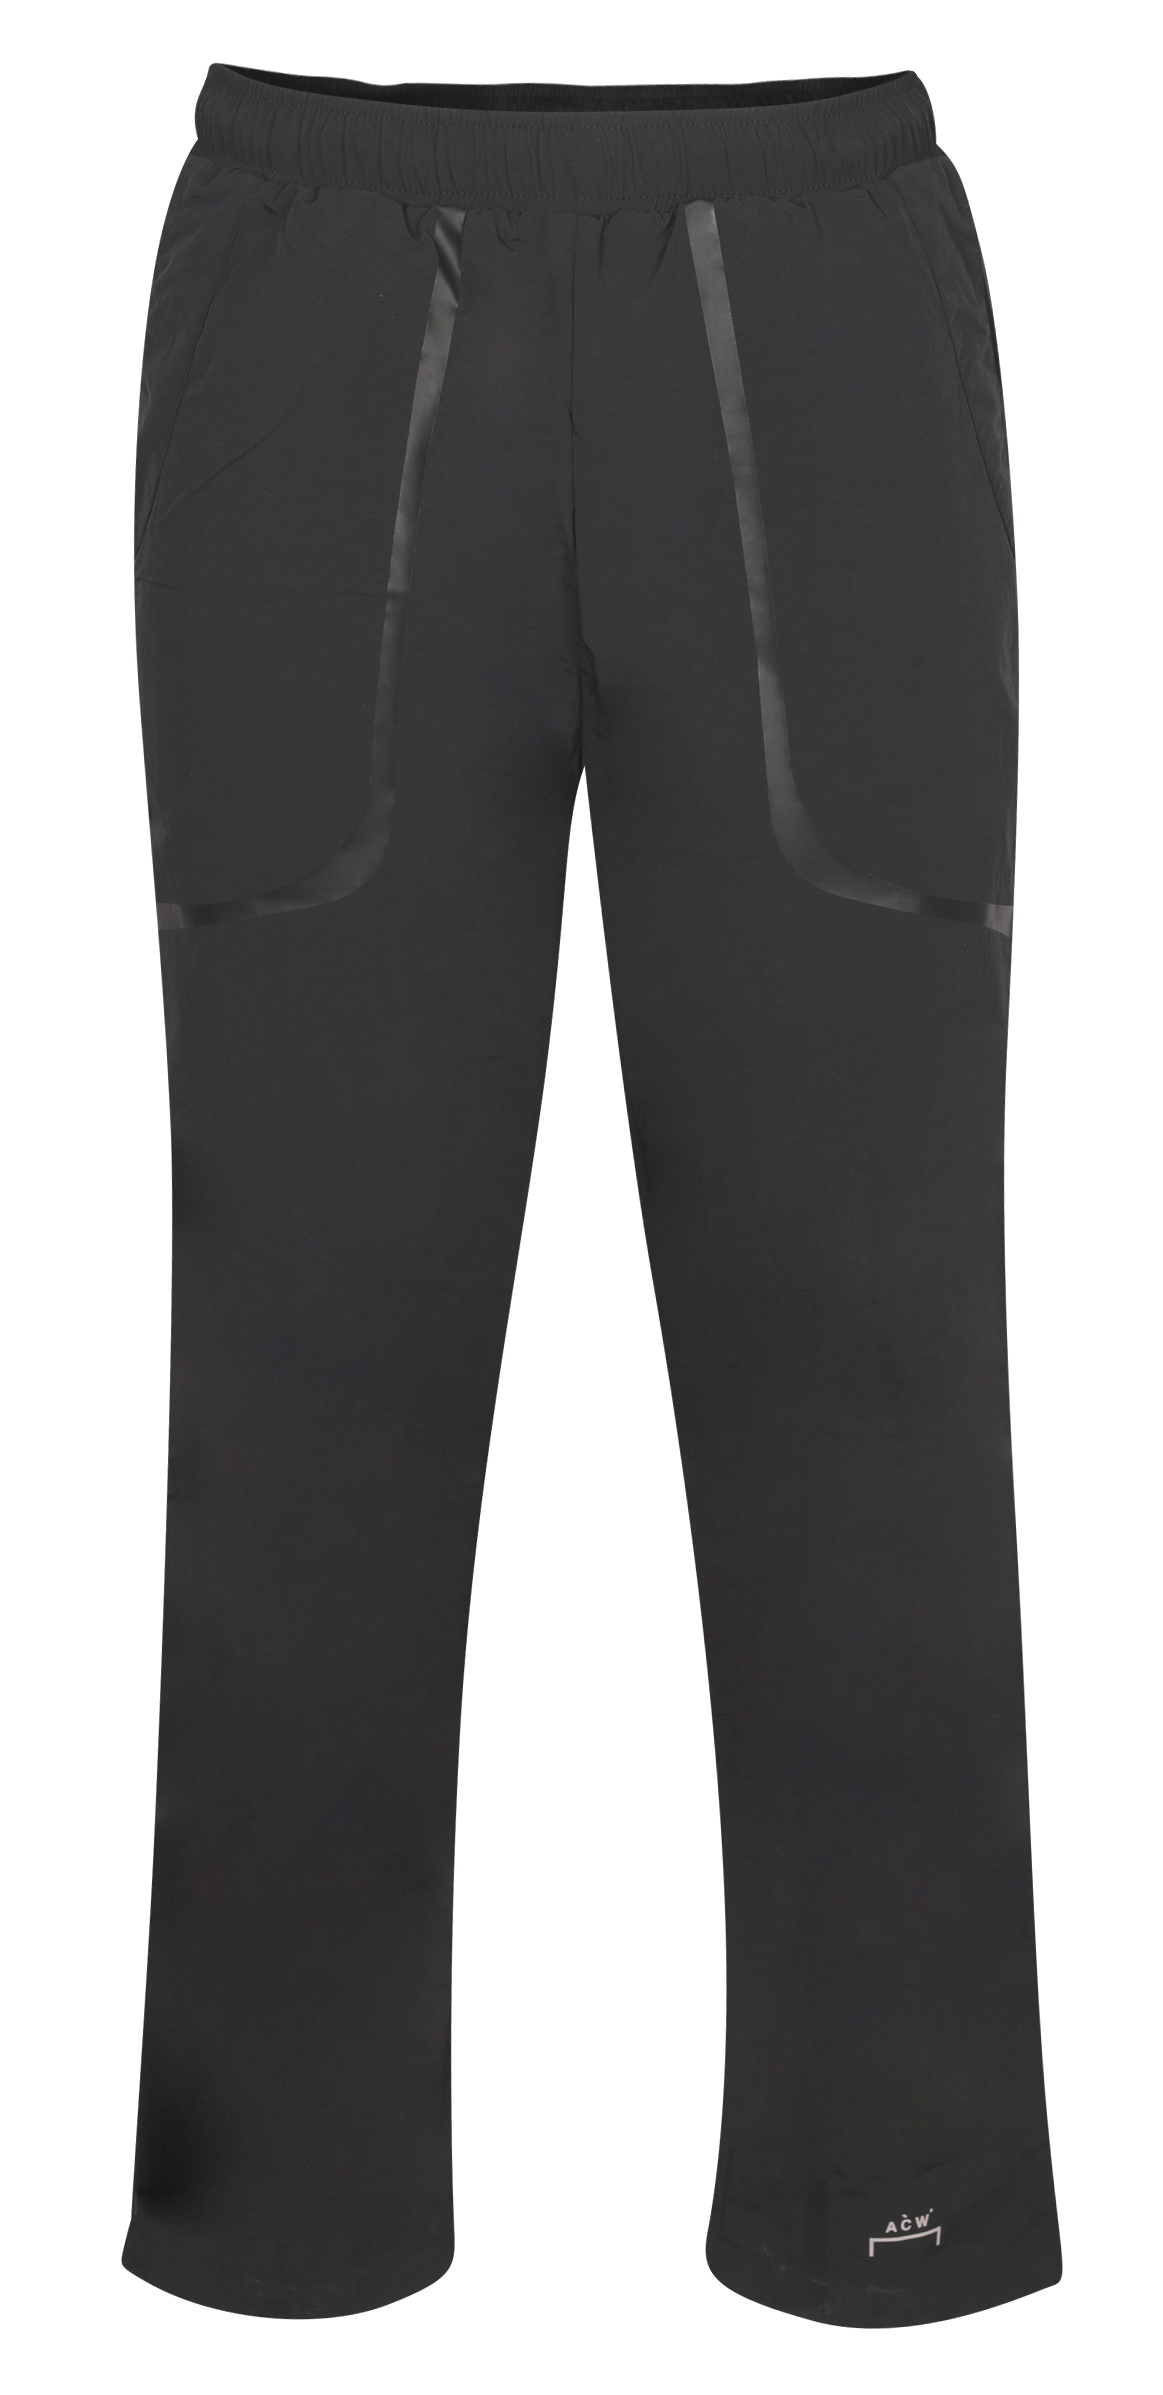 A-Cold-Wall Overlay Pant Black